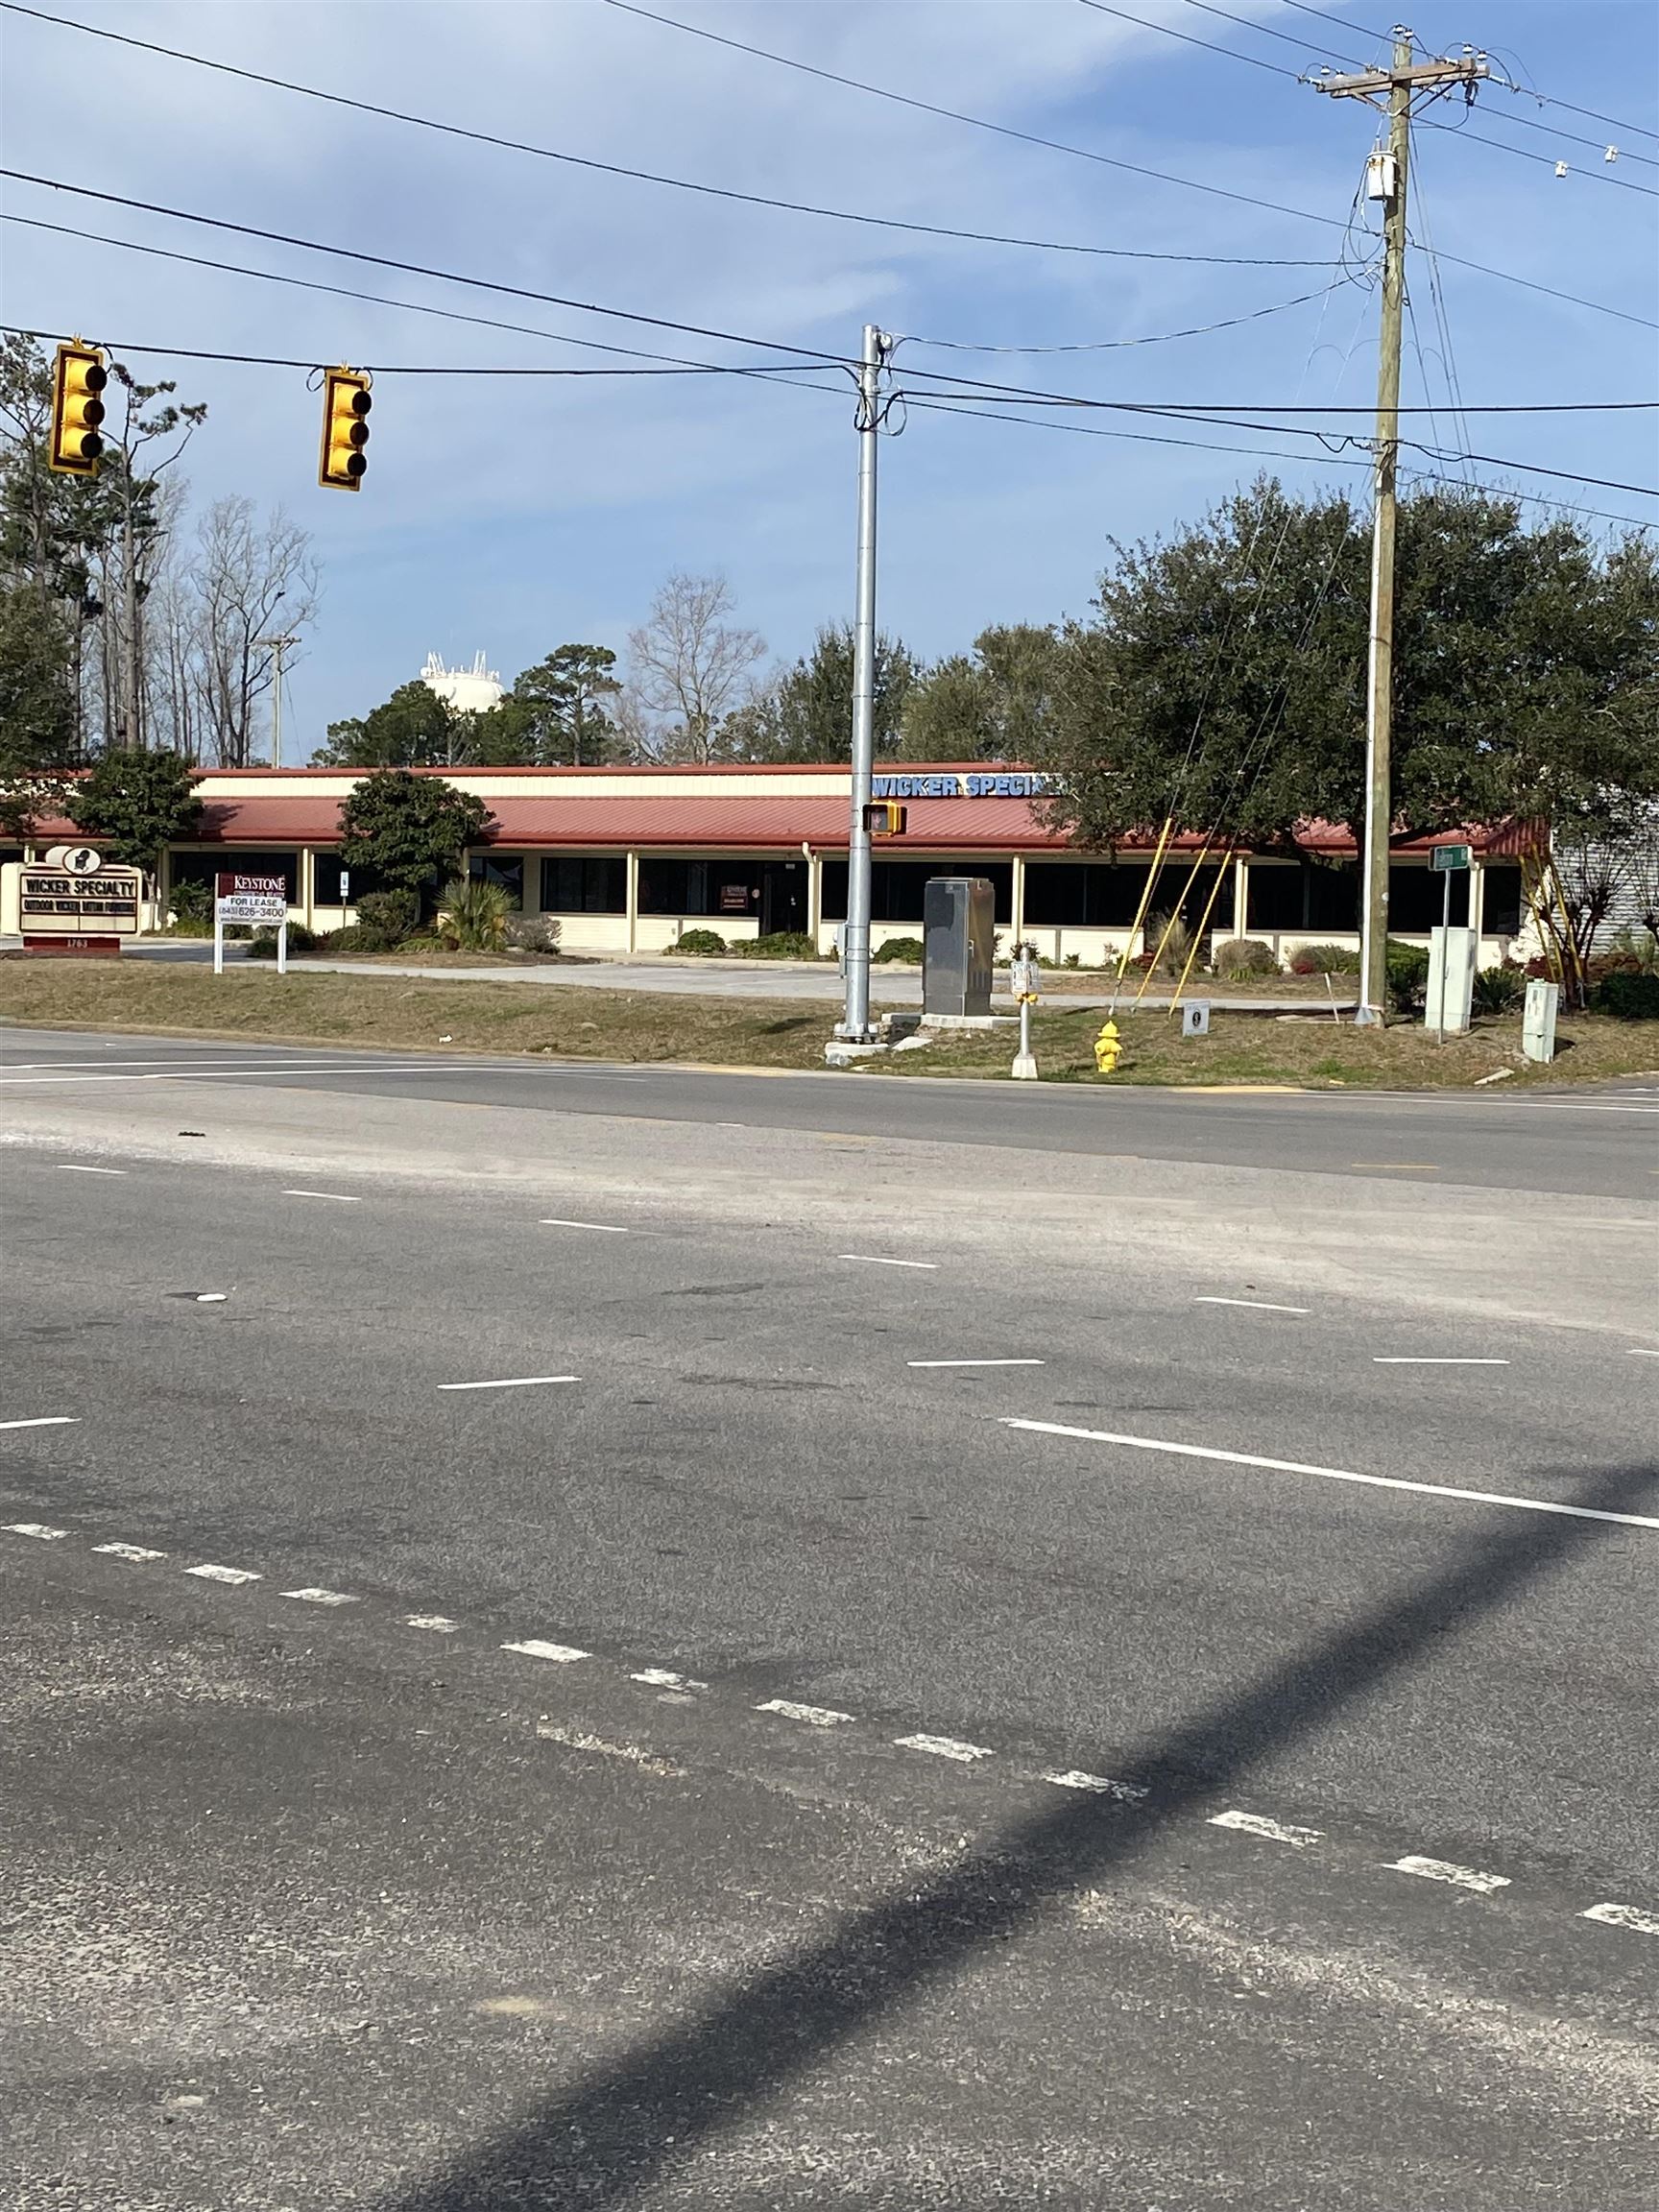 for lease +/- 11,440 sf of retail/warehouse space located at the signalized intersection of highway 17 and nelson road. this property is strategically positioned near north myrtle beach, longs, calabash, and sunset beach. this unit can be divided into bays ranging from 1,680 to 11,440 sf.  retail/warehouse units available ranging from 1,680 sf to 11,440 sf approximately 245 frontage on highway 17 signalized intersection highway 17 and nelson rd. double front doors identified as pin #31102040009, county of horry, sc. monument signage available